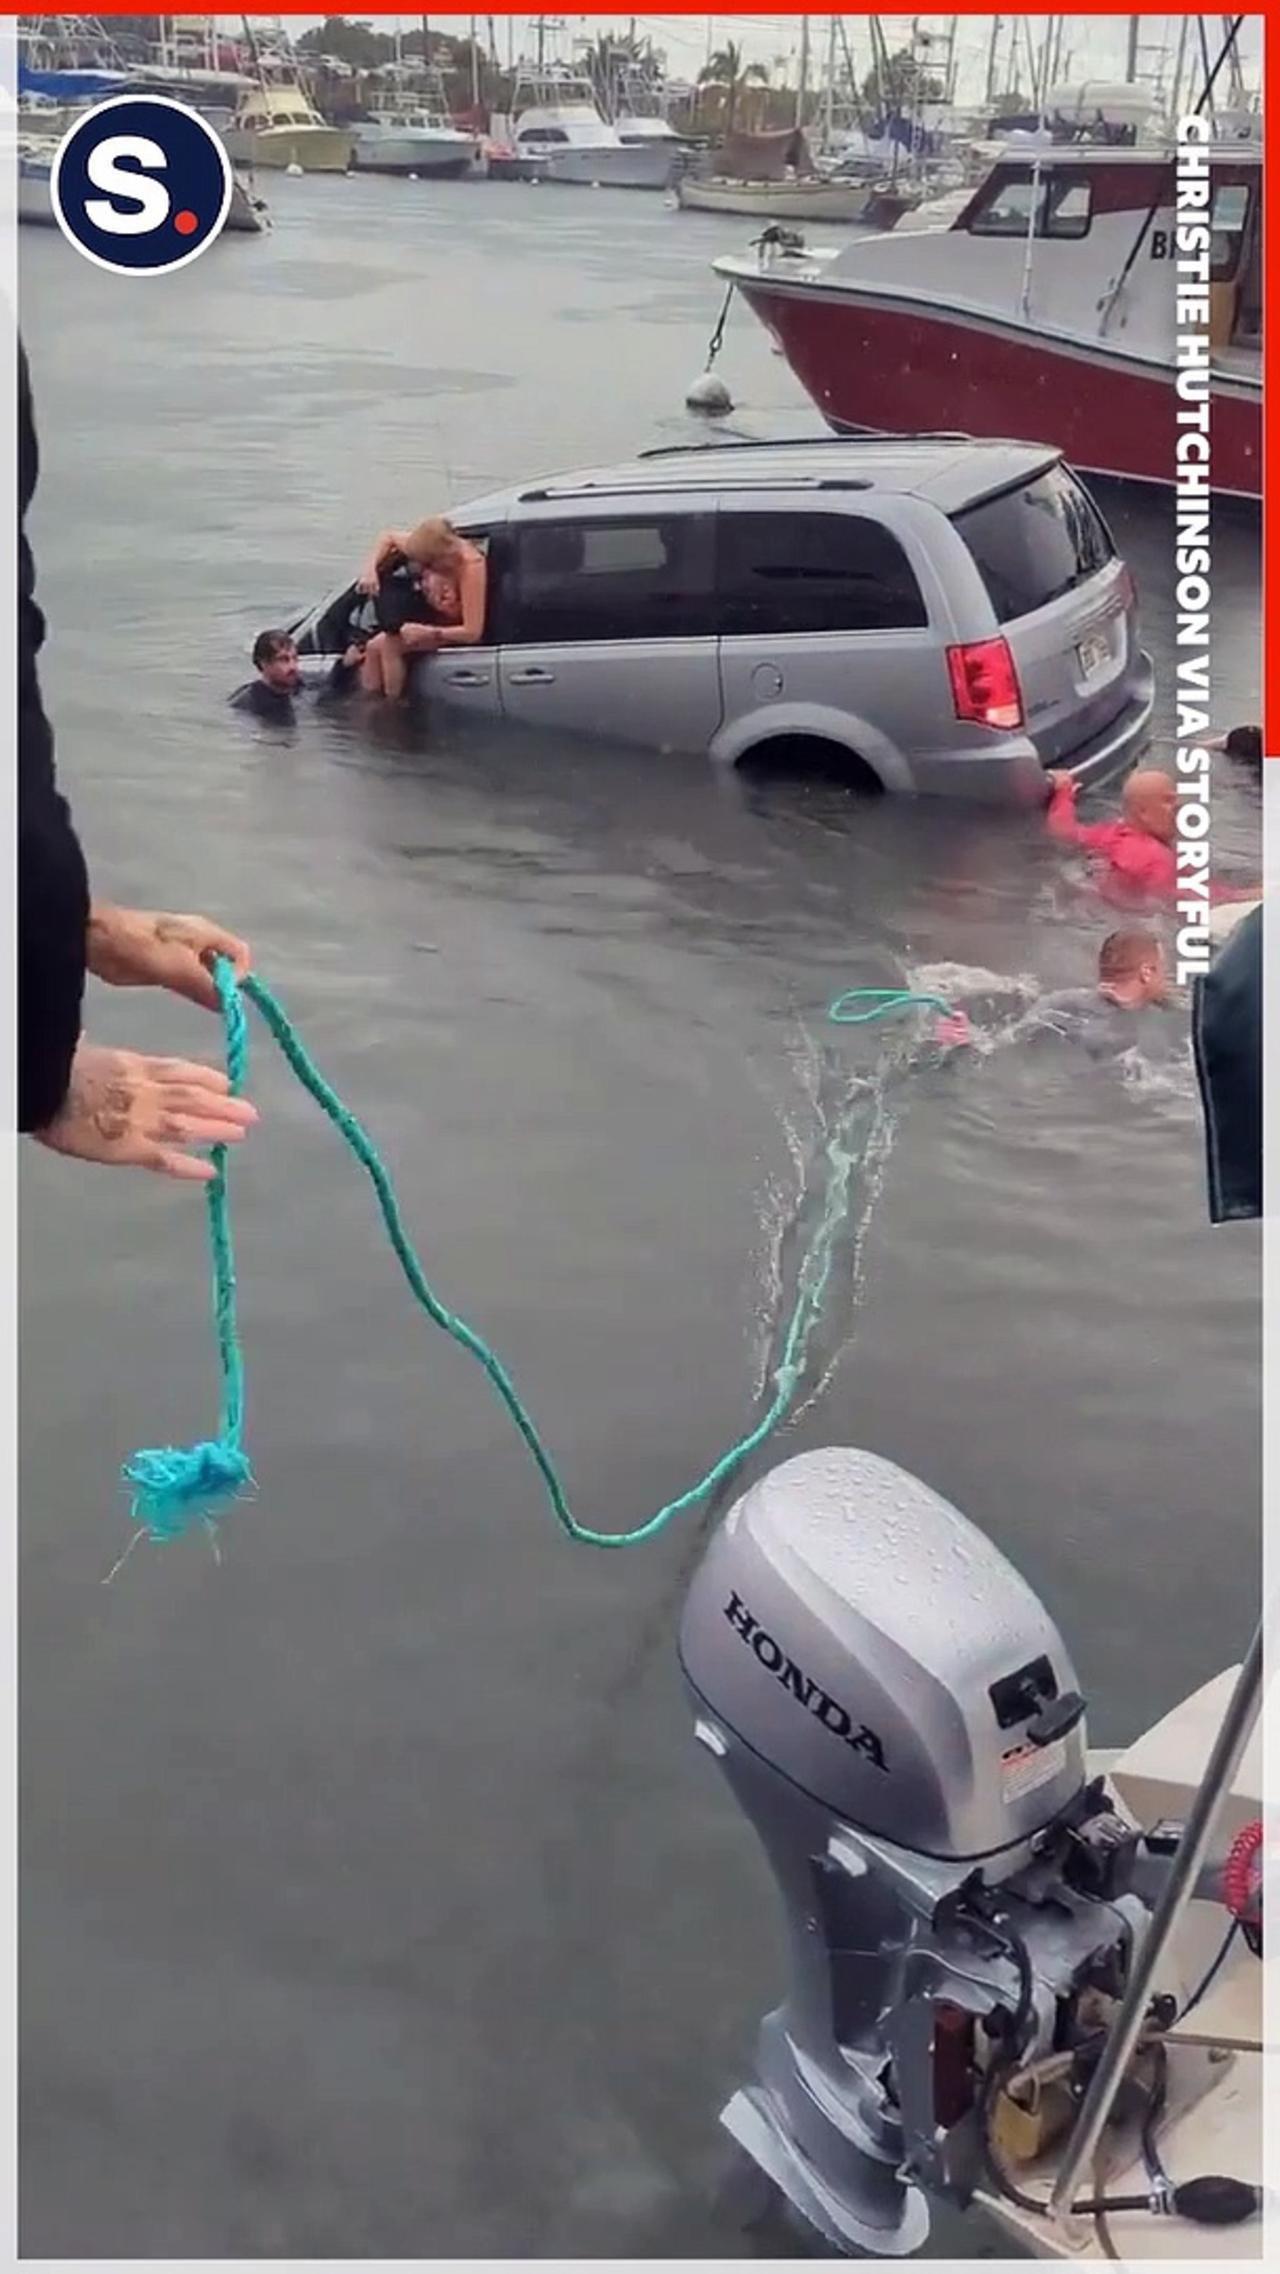 Sailboat Crew Rescues Tourists After They Drive Car Into Harbor in Hawaii